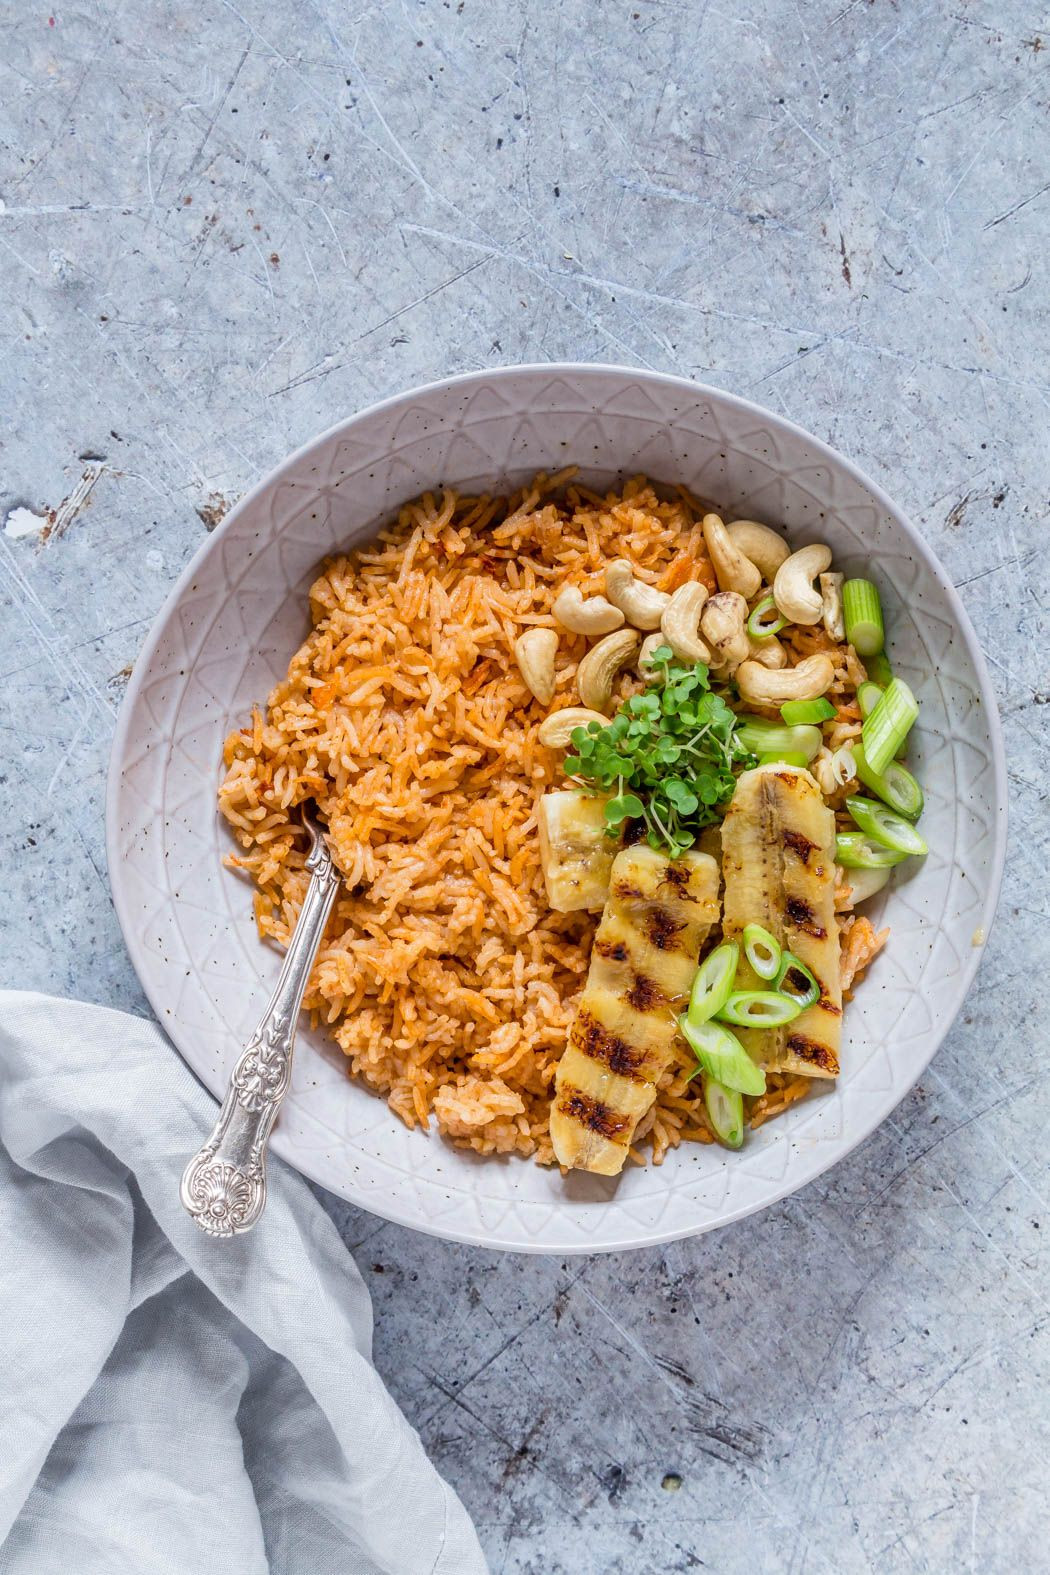 African Food Recipes For Kids
 This baked Jollof rice recipe is easy to make with just